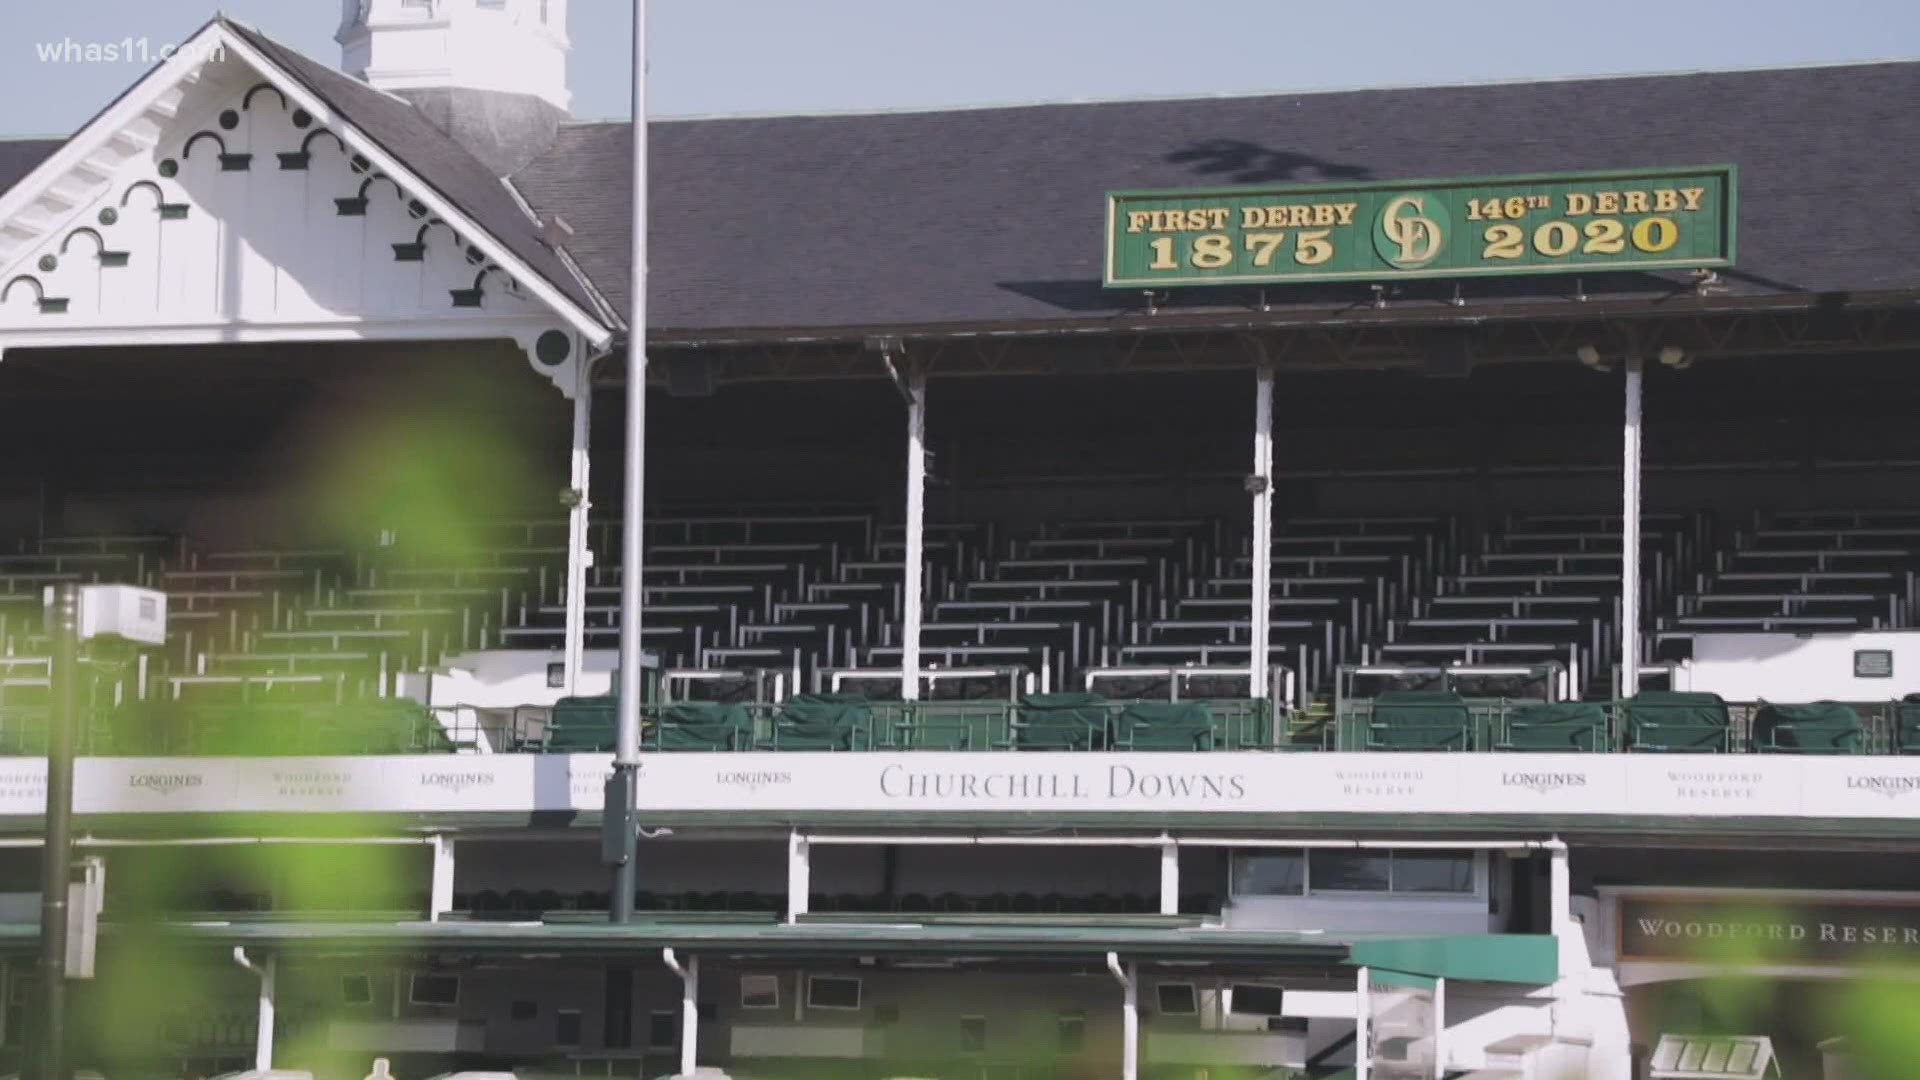 the Kentucky Derby will go off for the 146th time in front of fans.